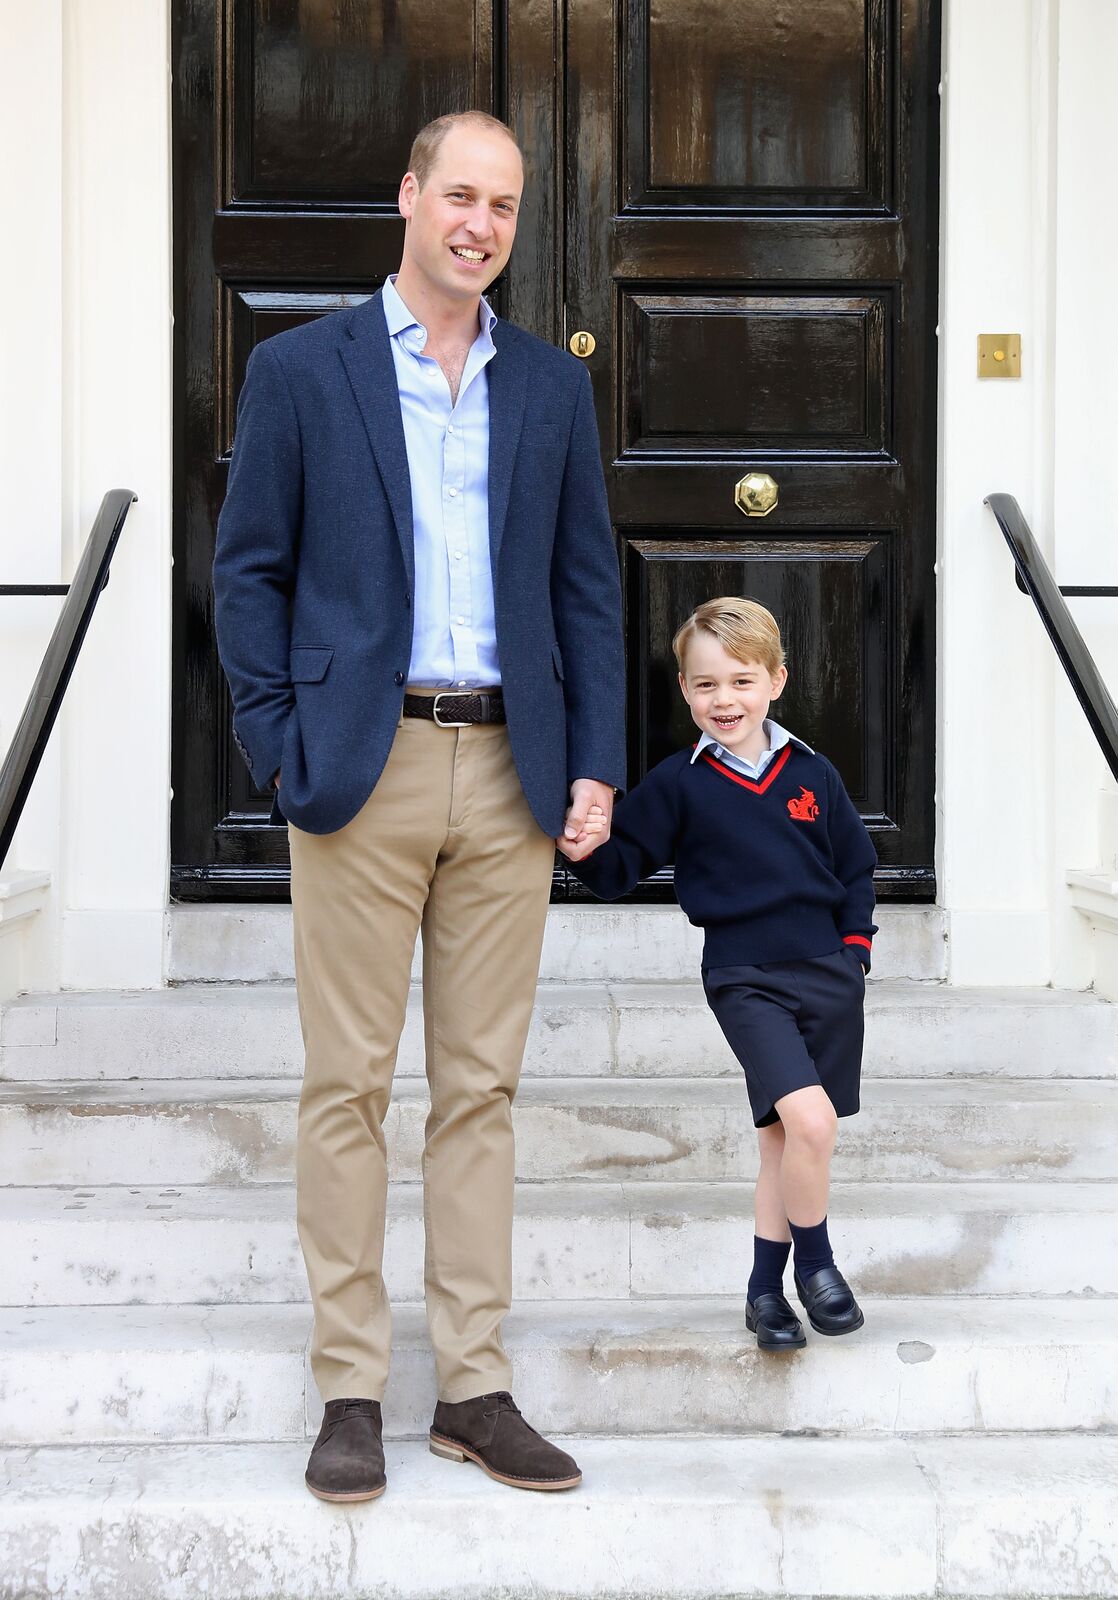 Prince George and his father Prince William pose for a photo on his first day of school at Thomas's Battersea  | Source: Getty Images